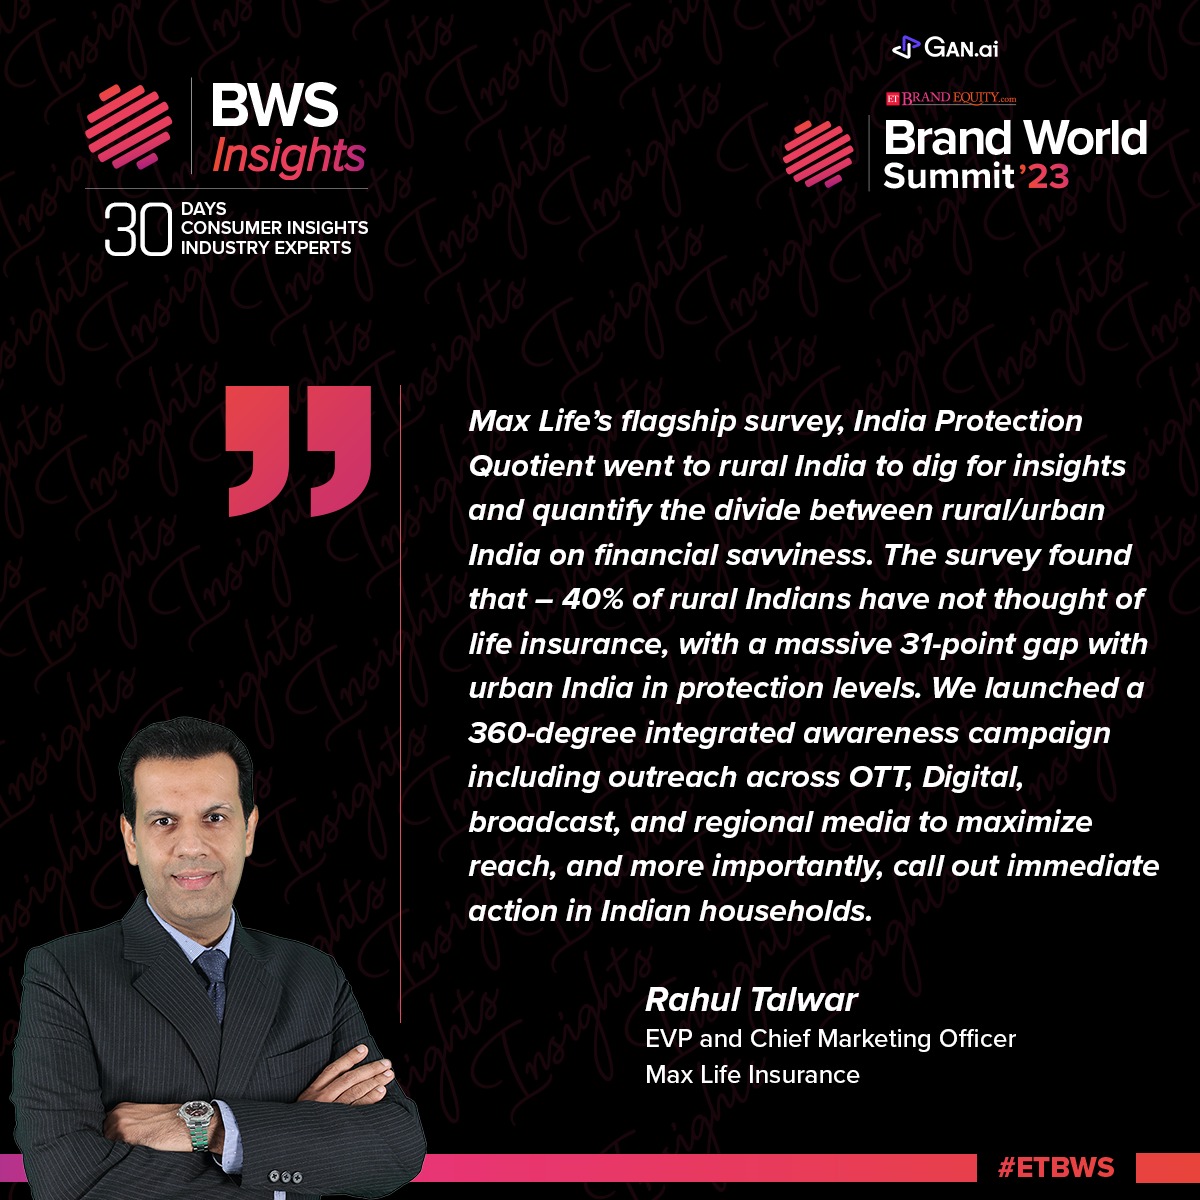 #RahulTalwar, Executive Vice President and Chief Marketing Officer at @MaxLifeIns, as he sheds light on the consumer insights of the brand. 

Know More: bit.ly/3P4D0jw

#ETBWS #BrandsWorldSummit #Ads #Branding #Agency